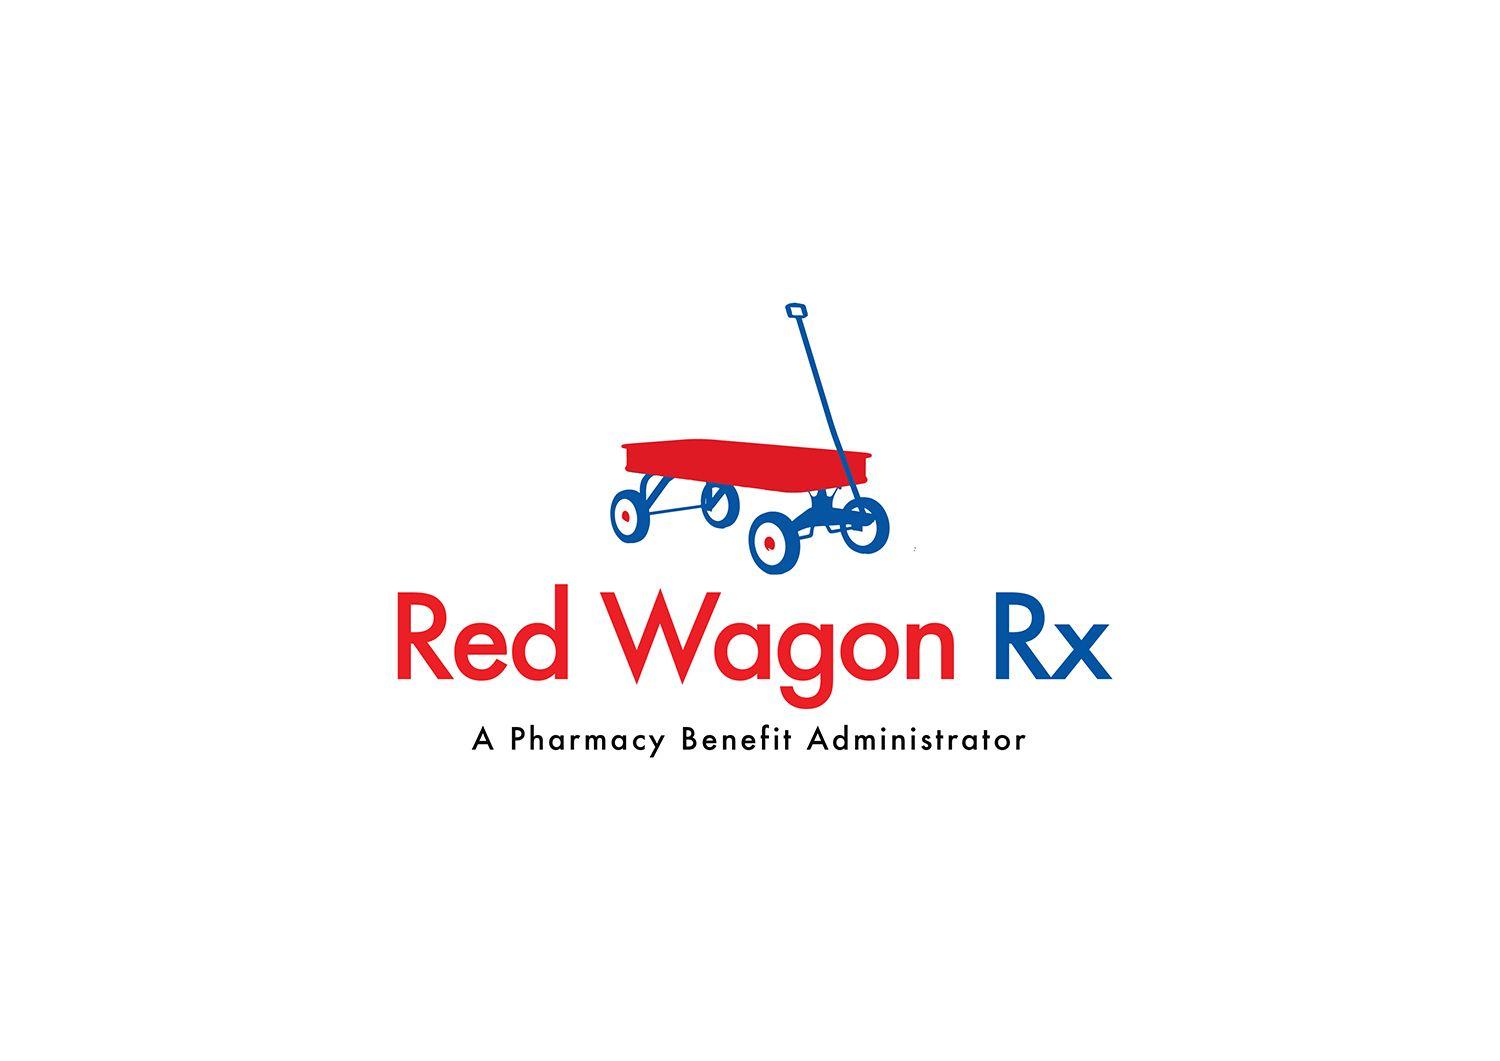 Red Rx Logo - Modern, Bold, Health Insurance Logo Design for Red Wagon Rx